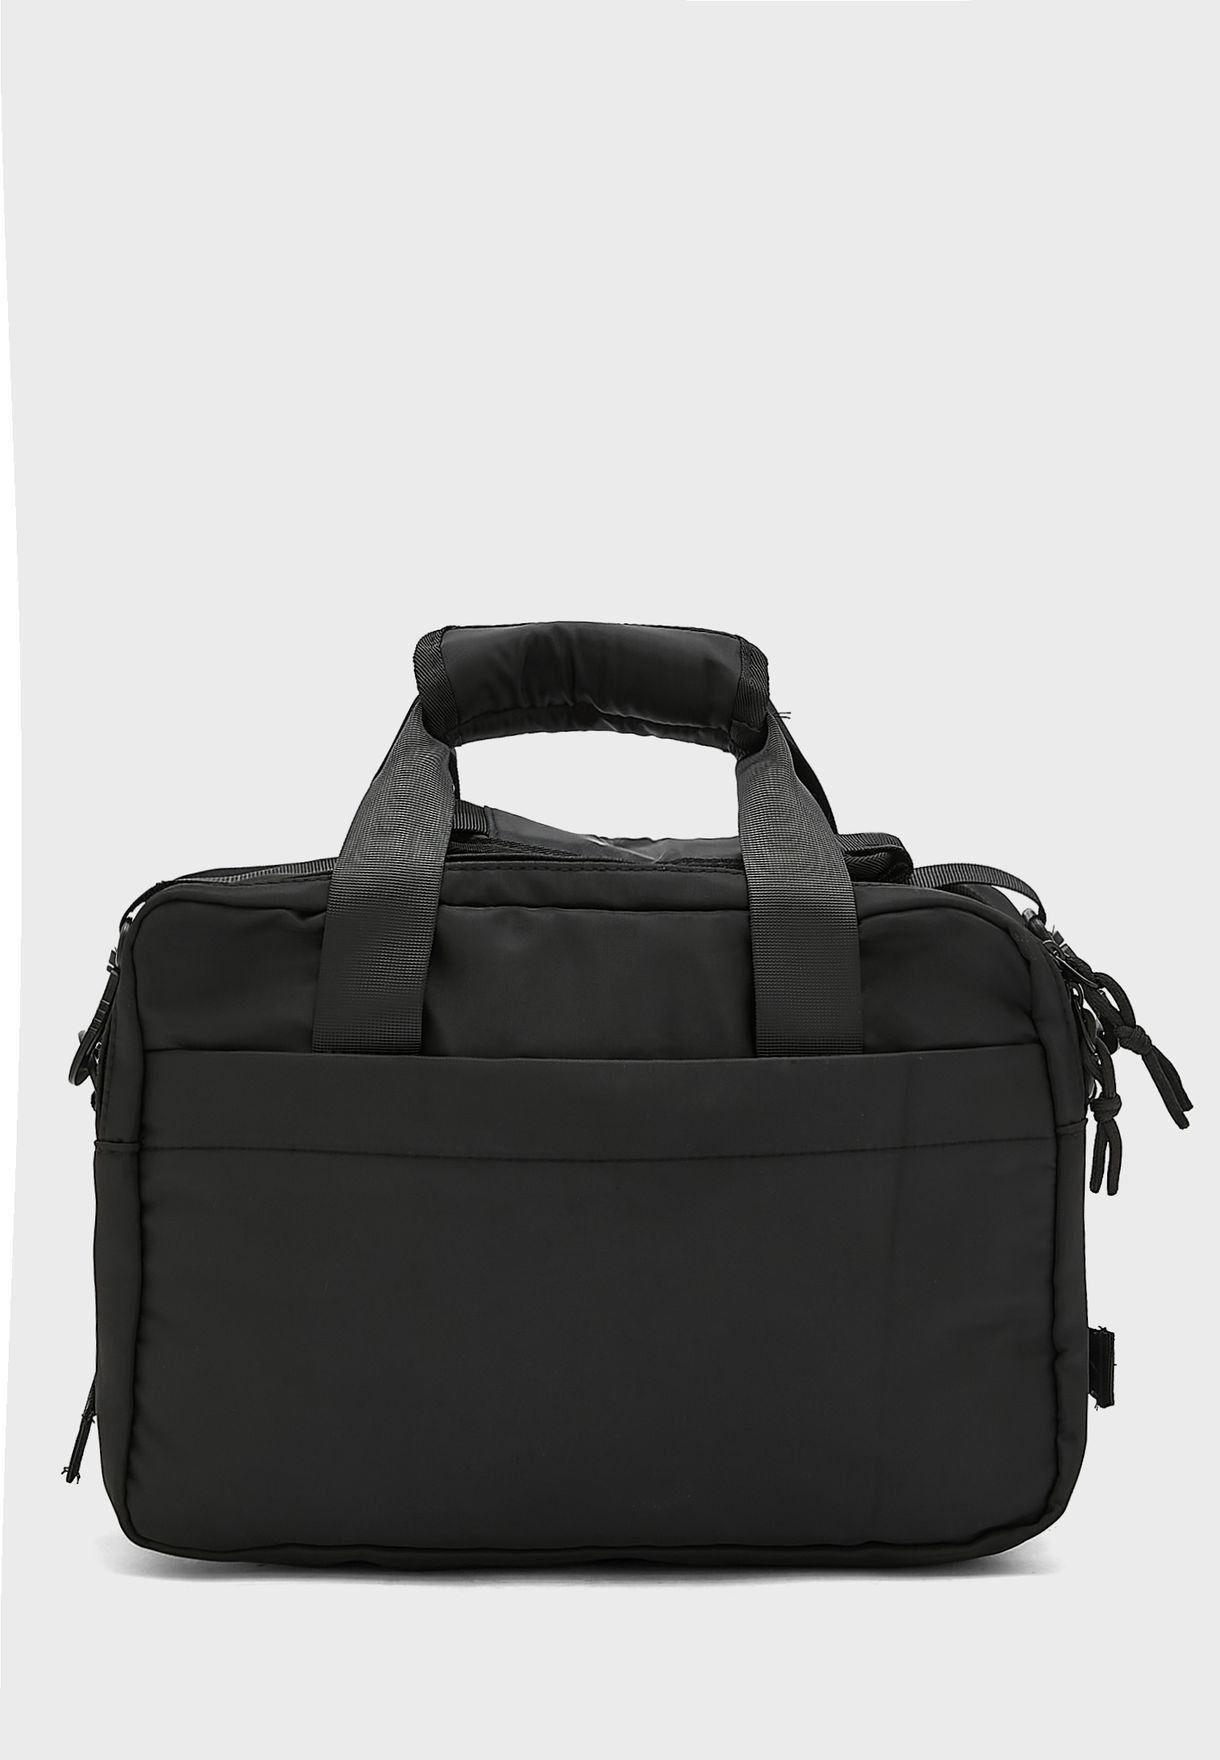 Spacious Laptop Bag With Multiple Pockets